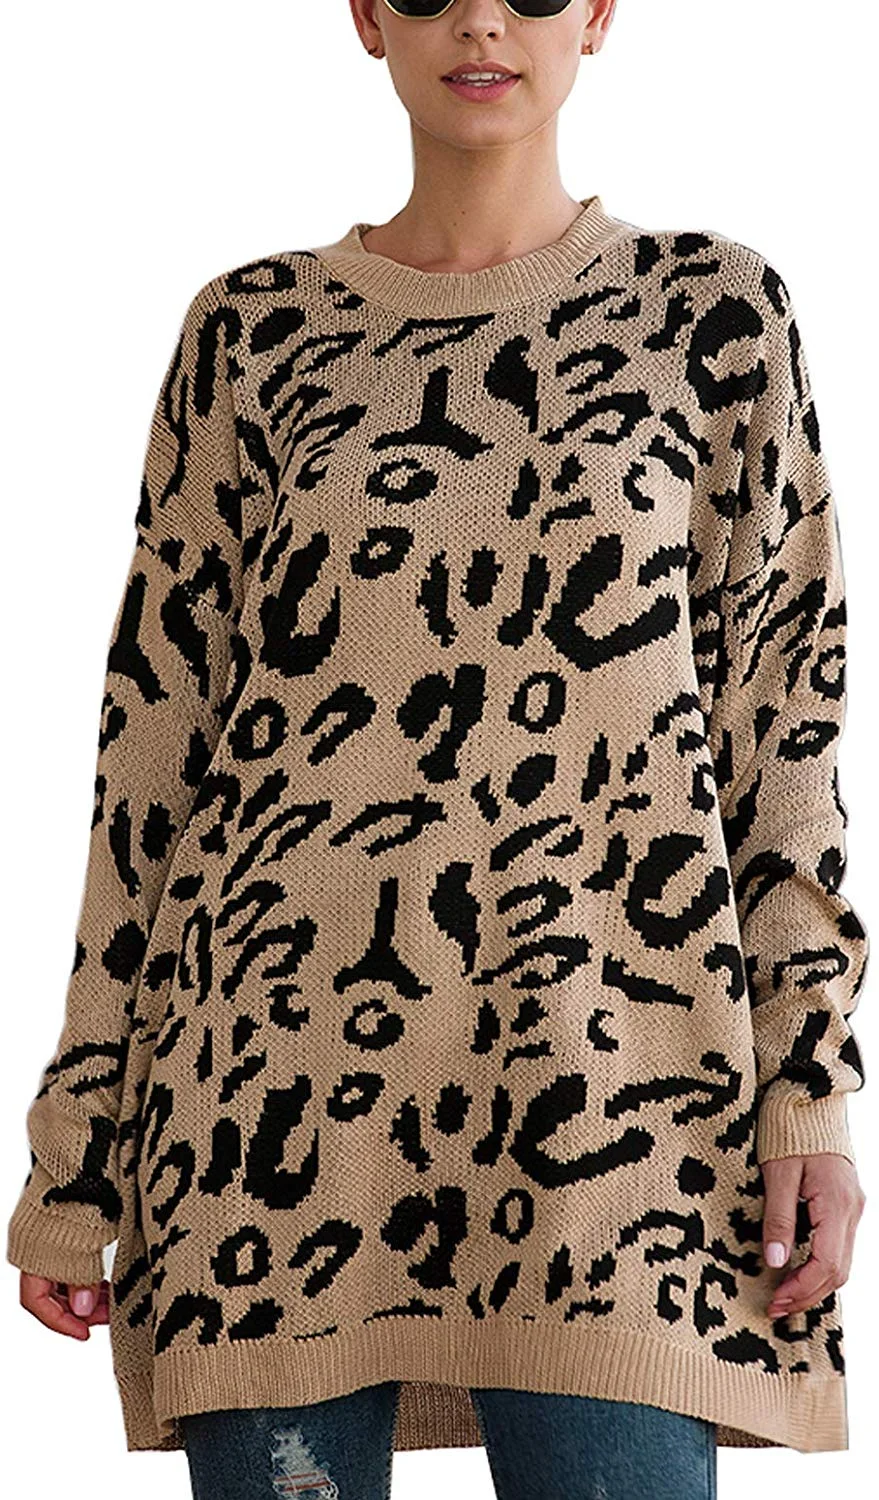 Pullover Sweaters Leopard Printed Oversize Knitted Crew Neck Sweater Long Sleeve Loose Jumper Sweatshirts Tops